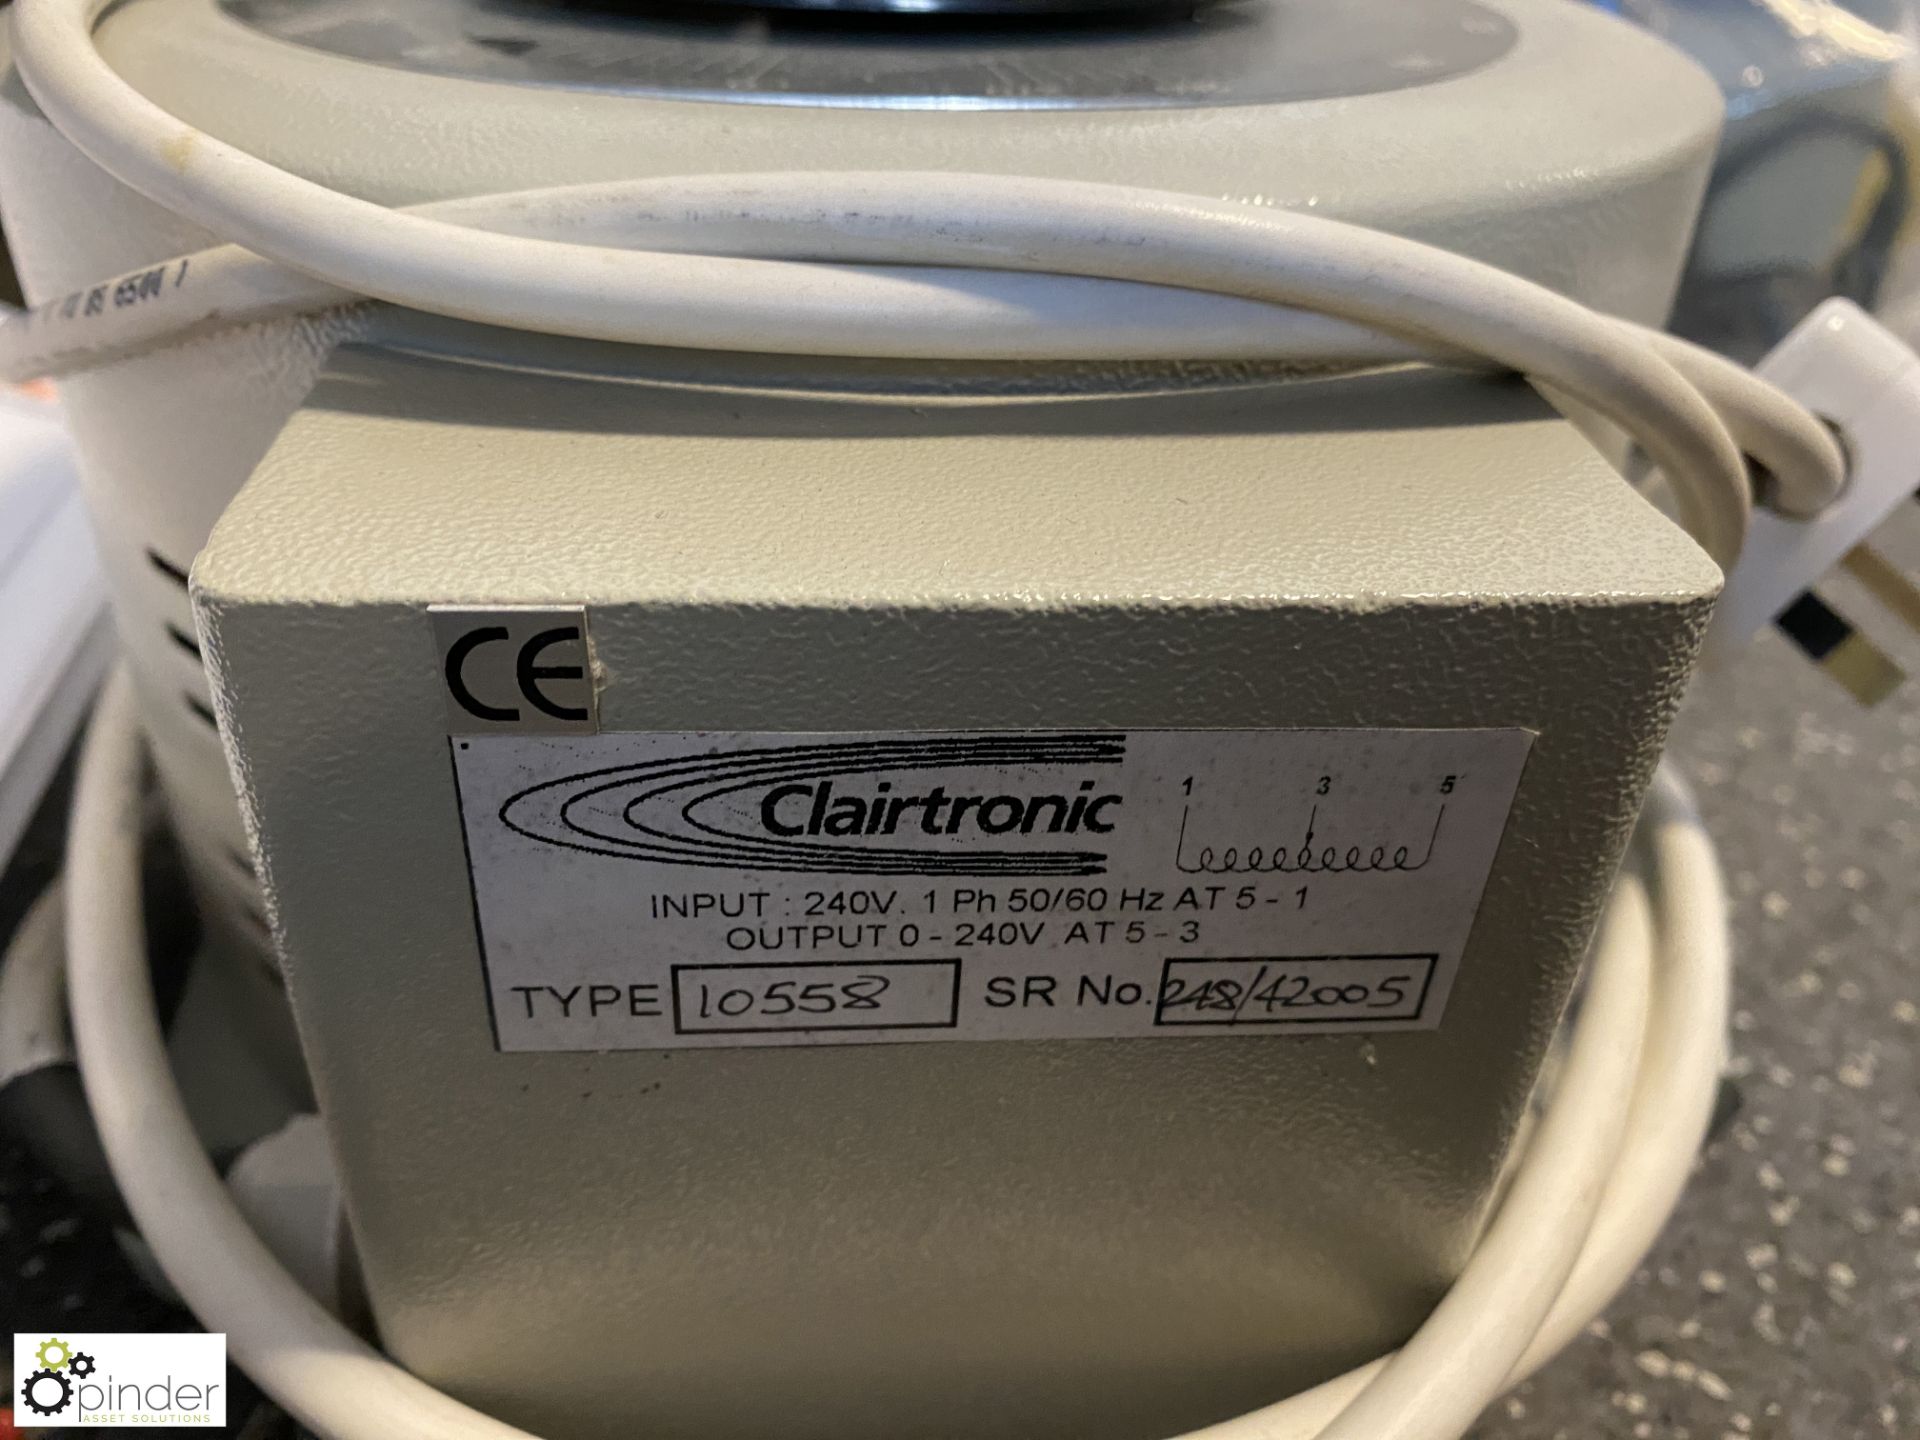 Clairtronic 10558 Variable Transformer - Image 2 of 4